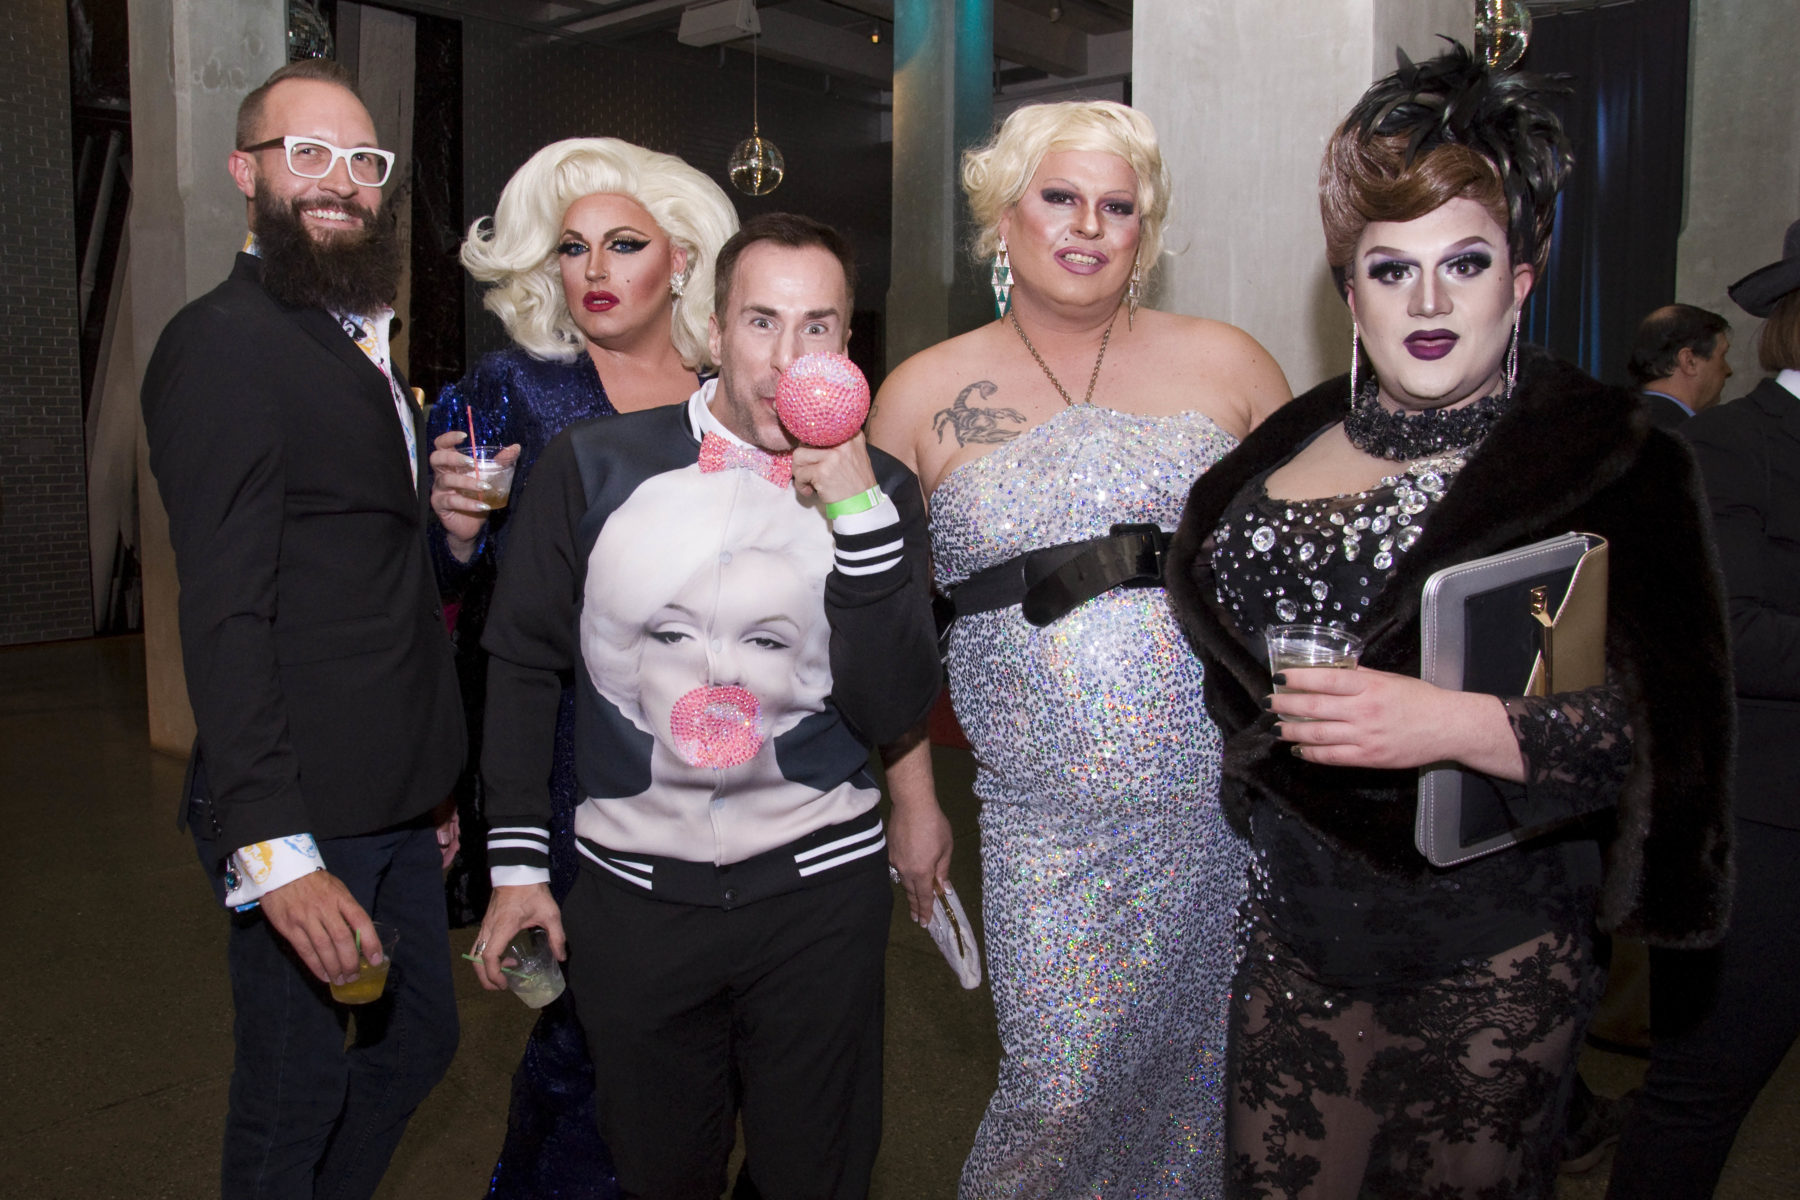 Two guests pose for a photograph with three of the evenings Marilyn inspired drag performers.